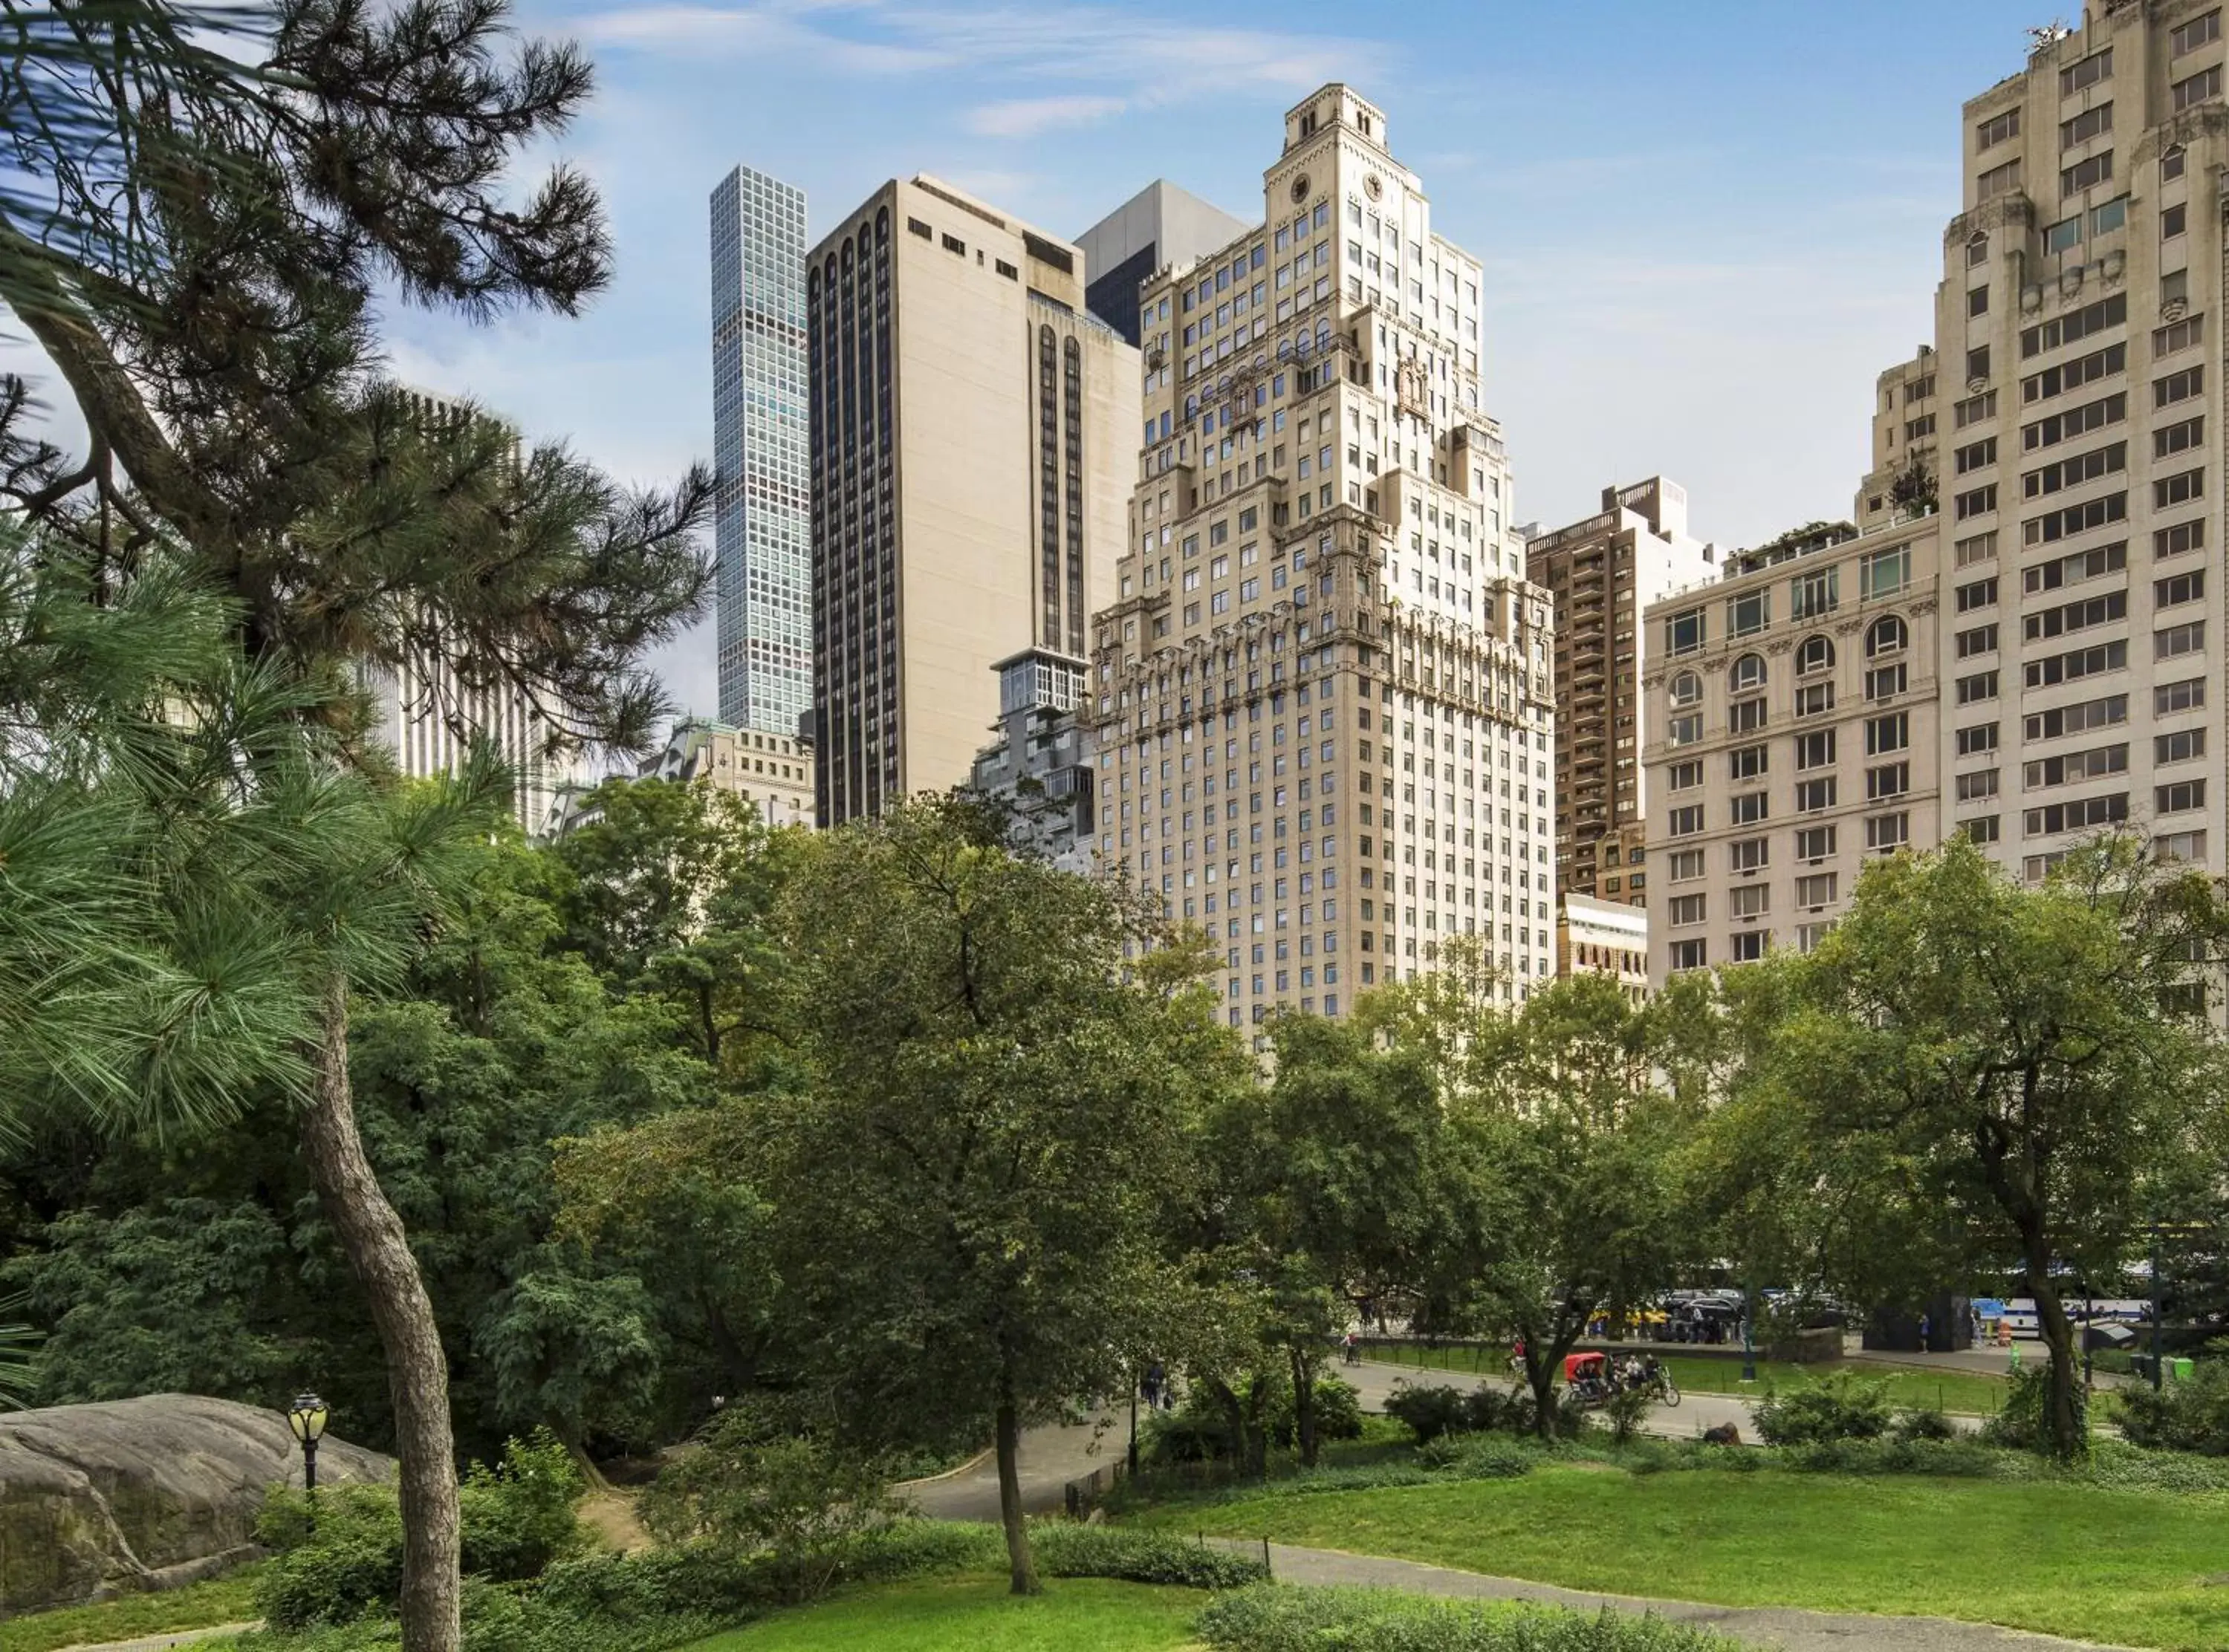 Property building in The Ritz-Carlton New York, Central Park